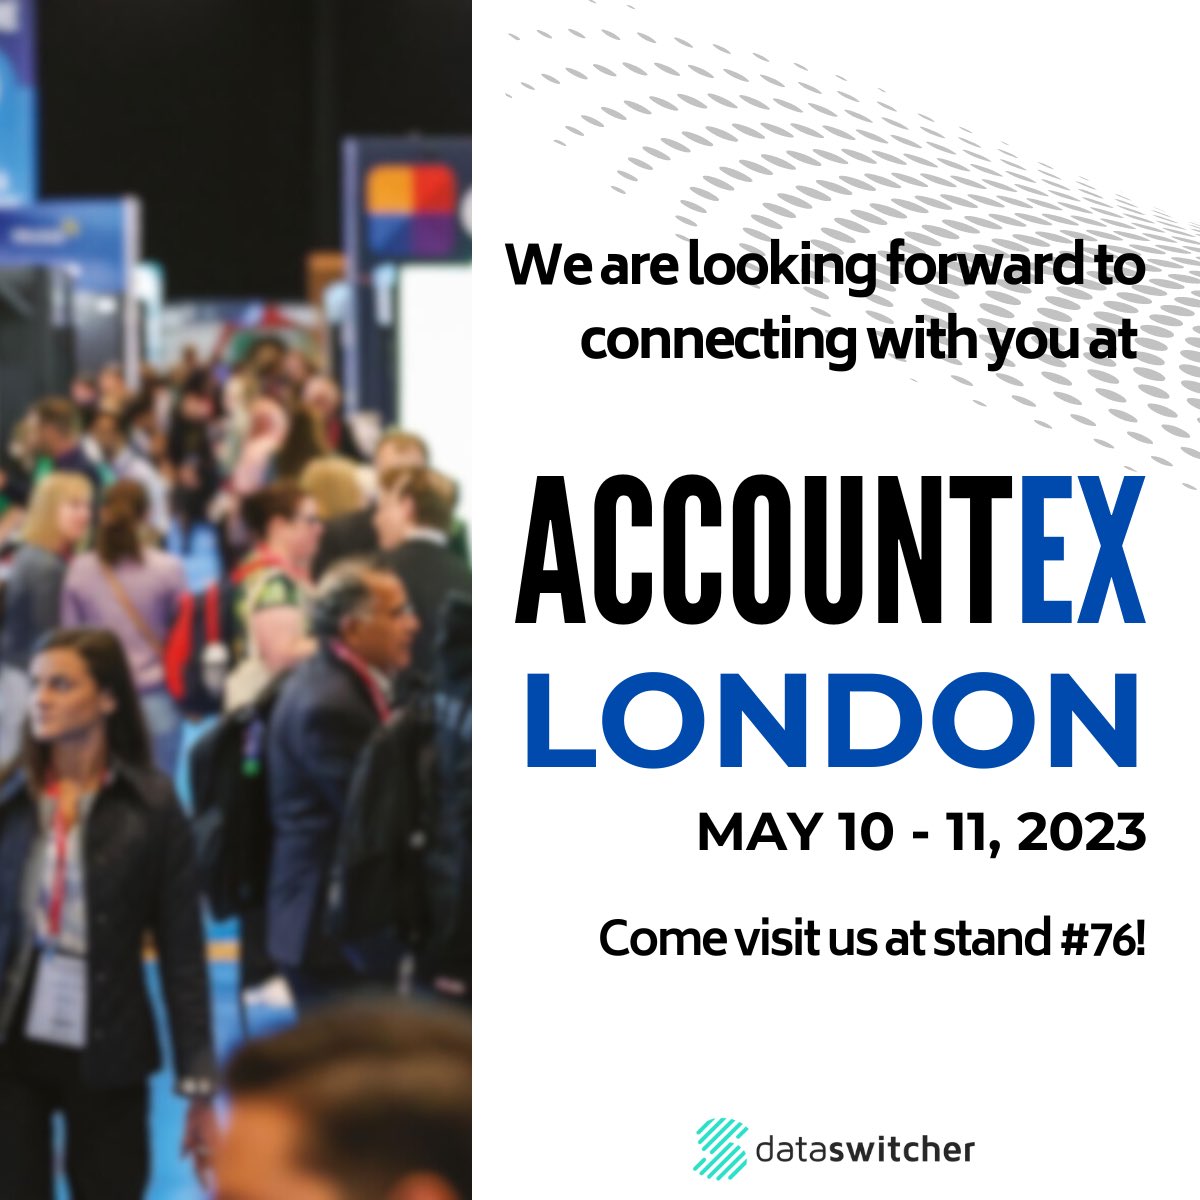 We're thrilled to be part of this year's @Accountex conference today. If you're planning on attending, we'd love to meet up with you! #AccountexLondon